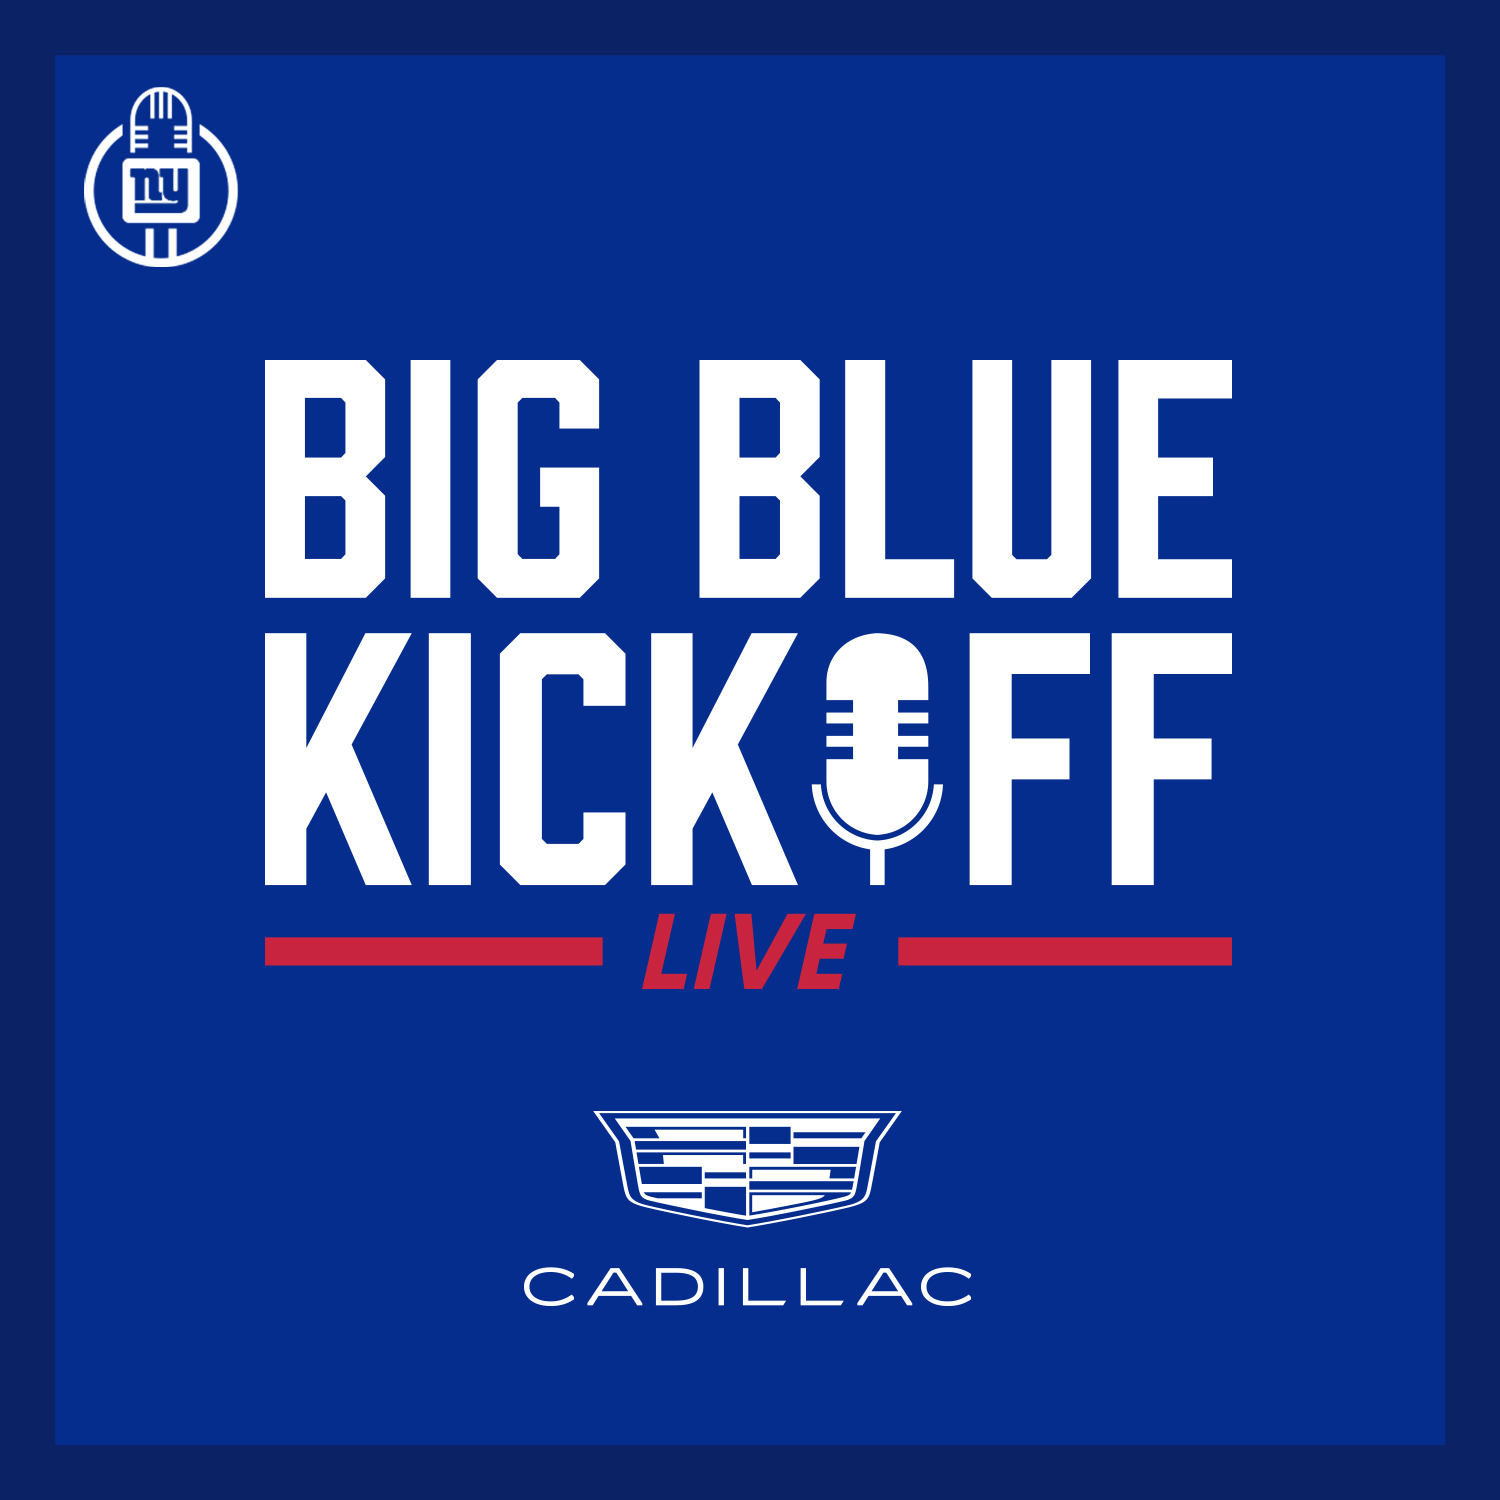 Big Blue Kickoff Live 5/12 | Previewing the schedule release